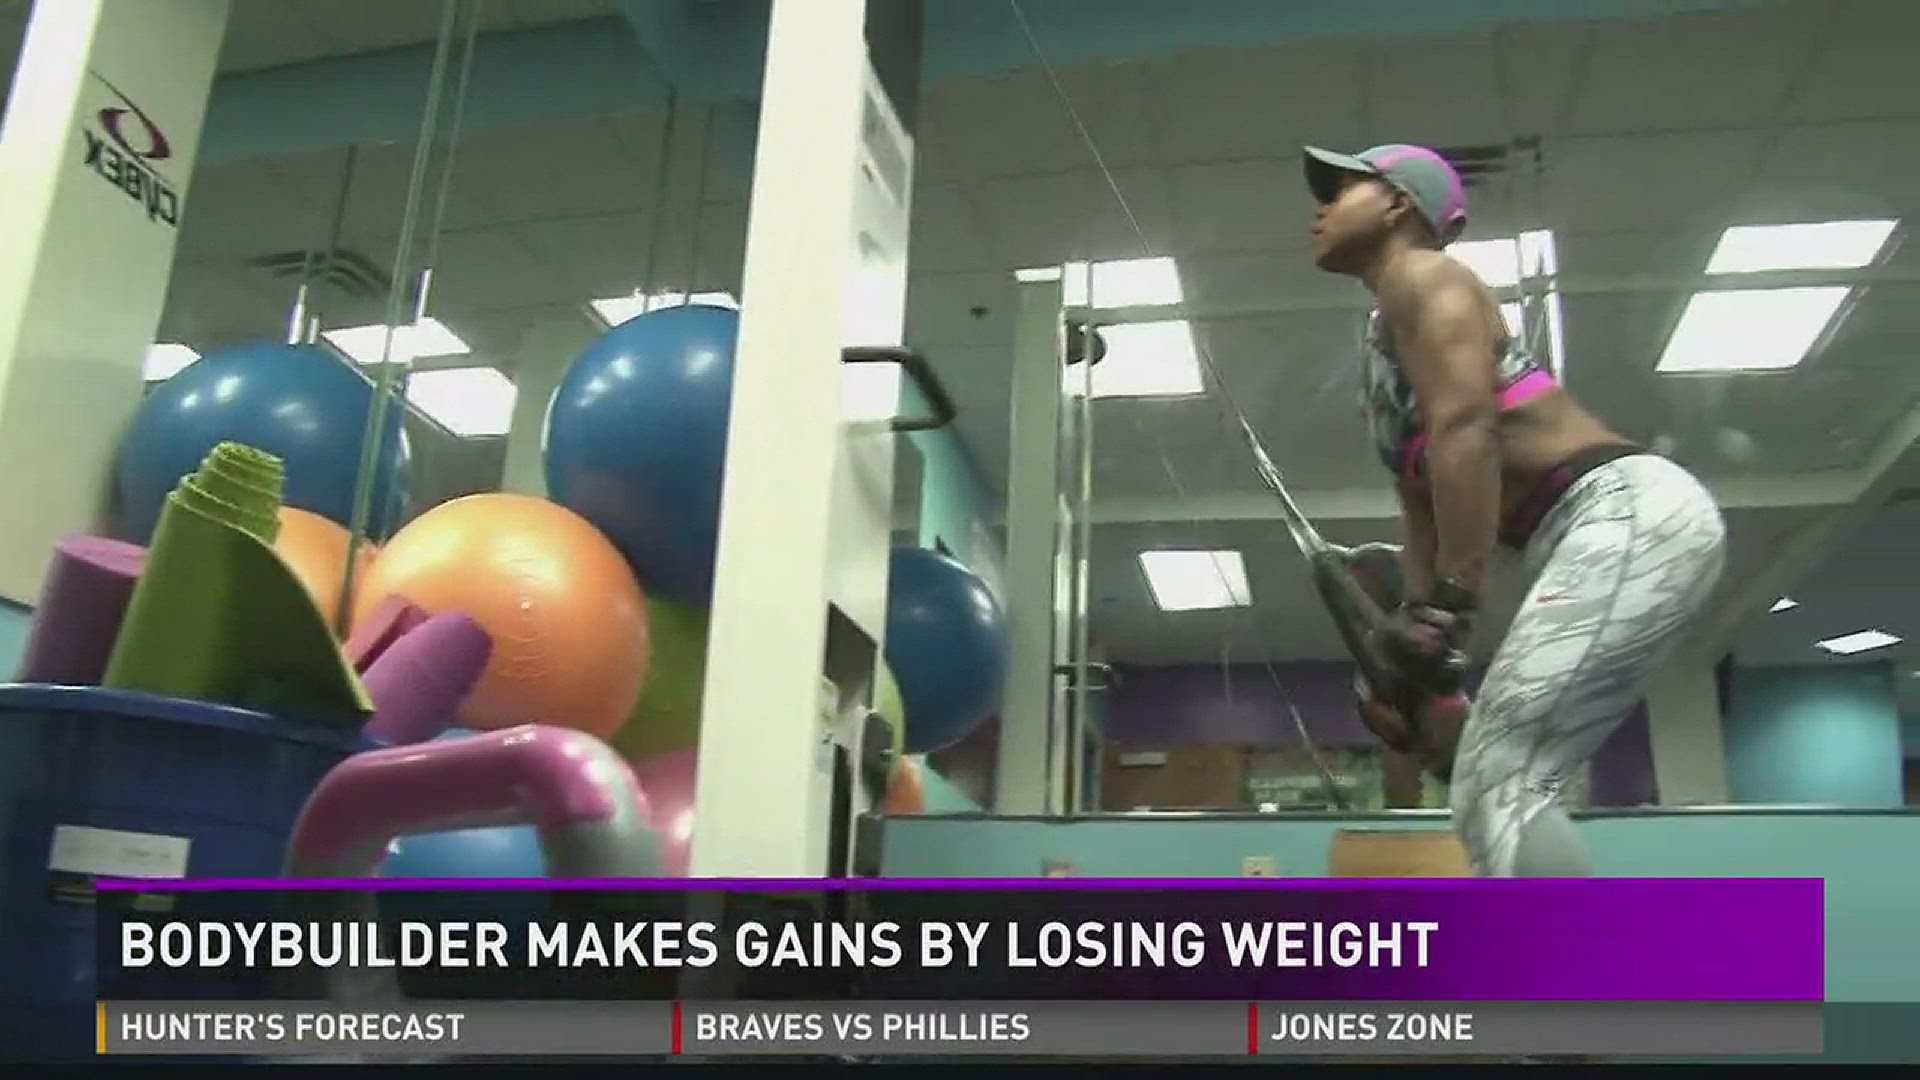 Amped Up: Bodybuilder makes gains by losing weight